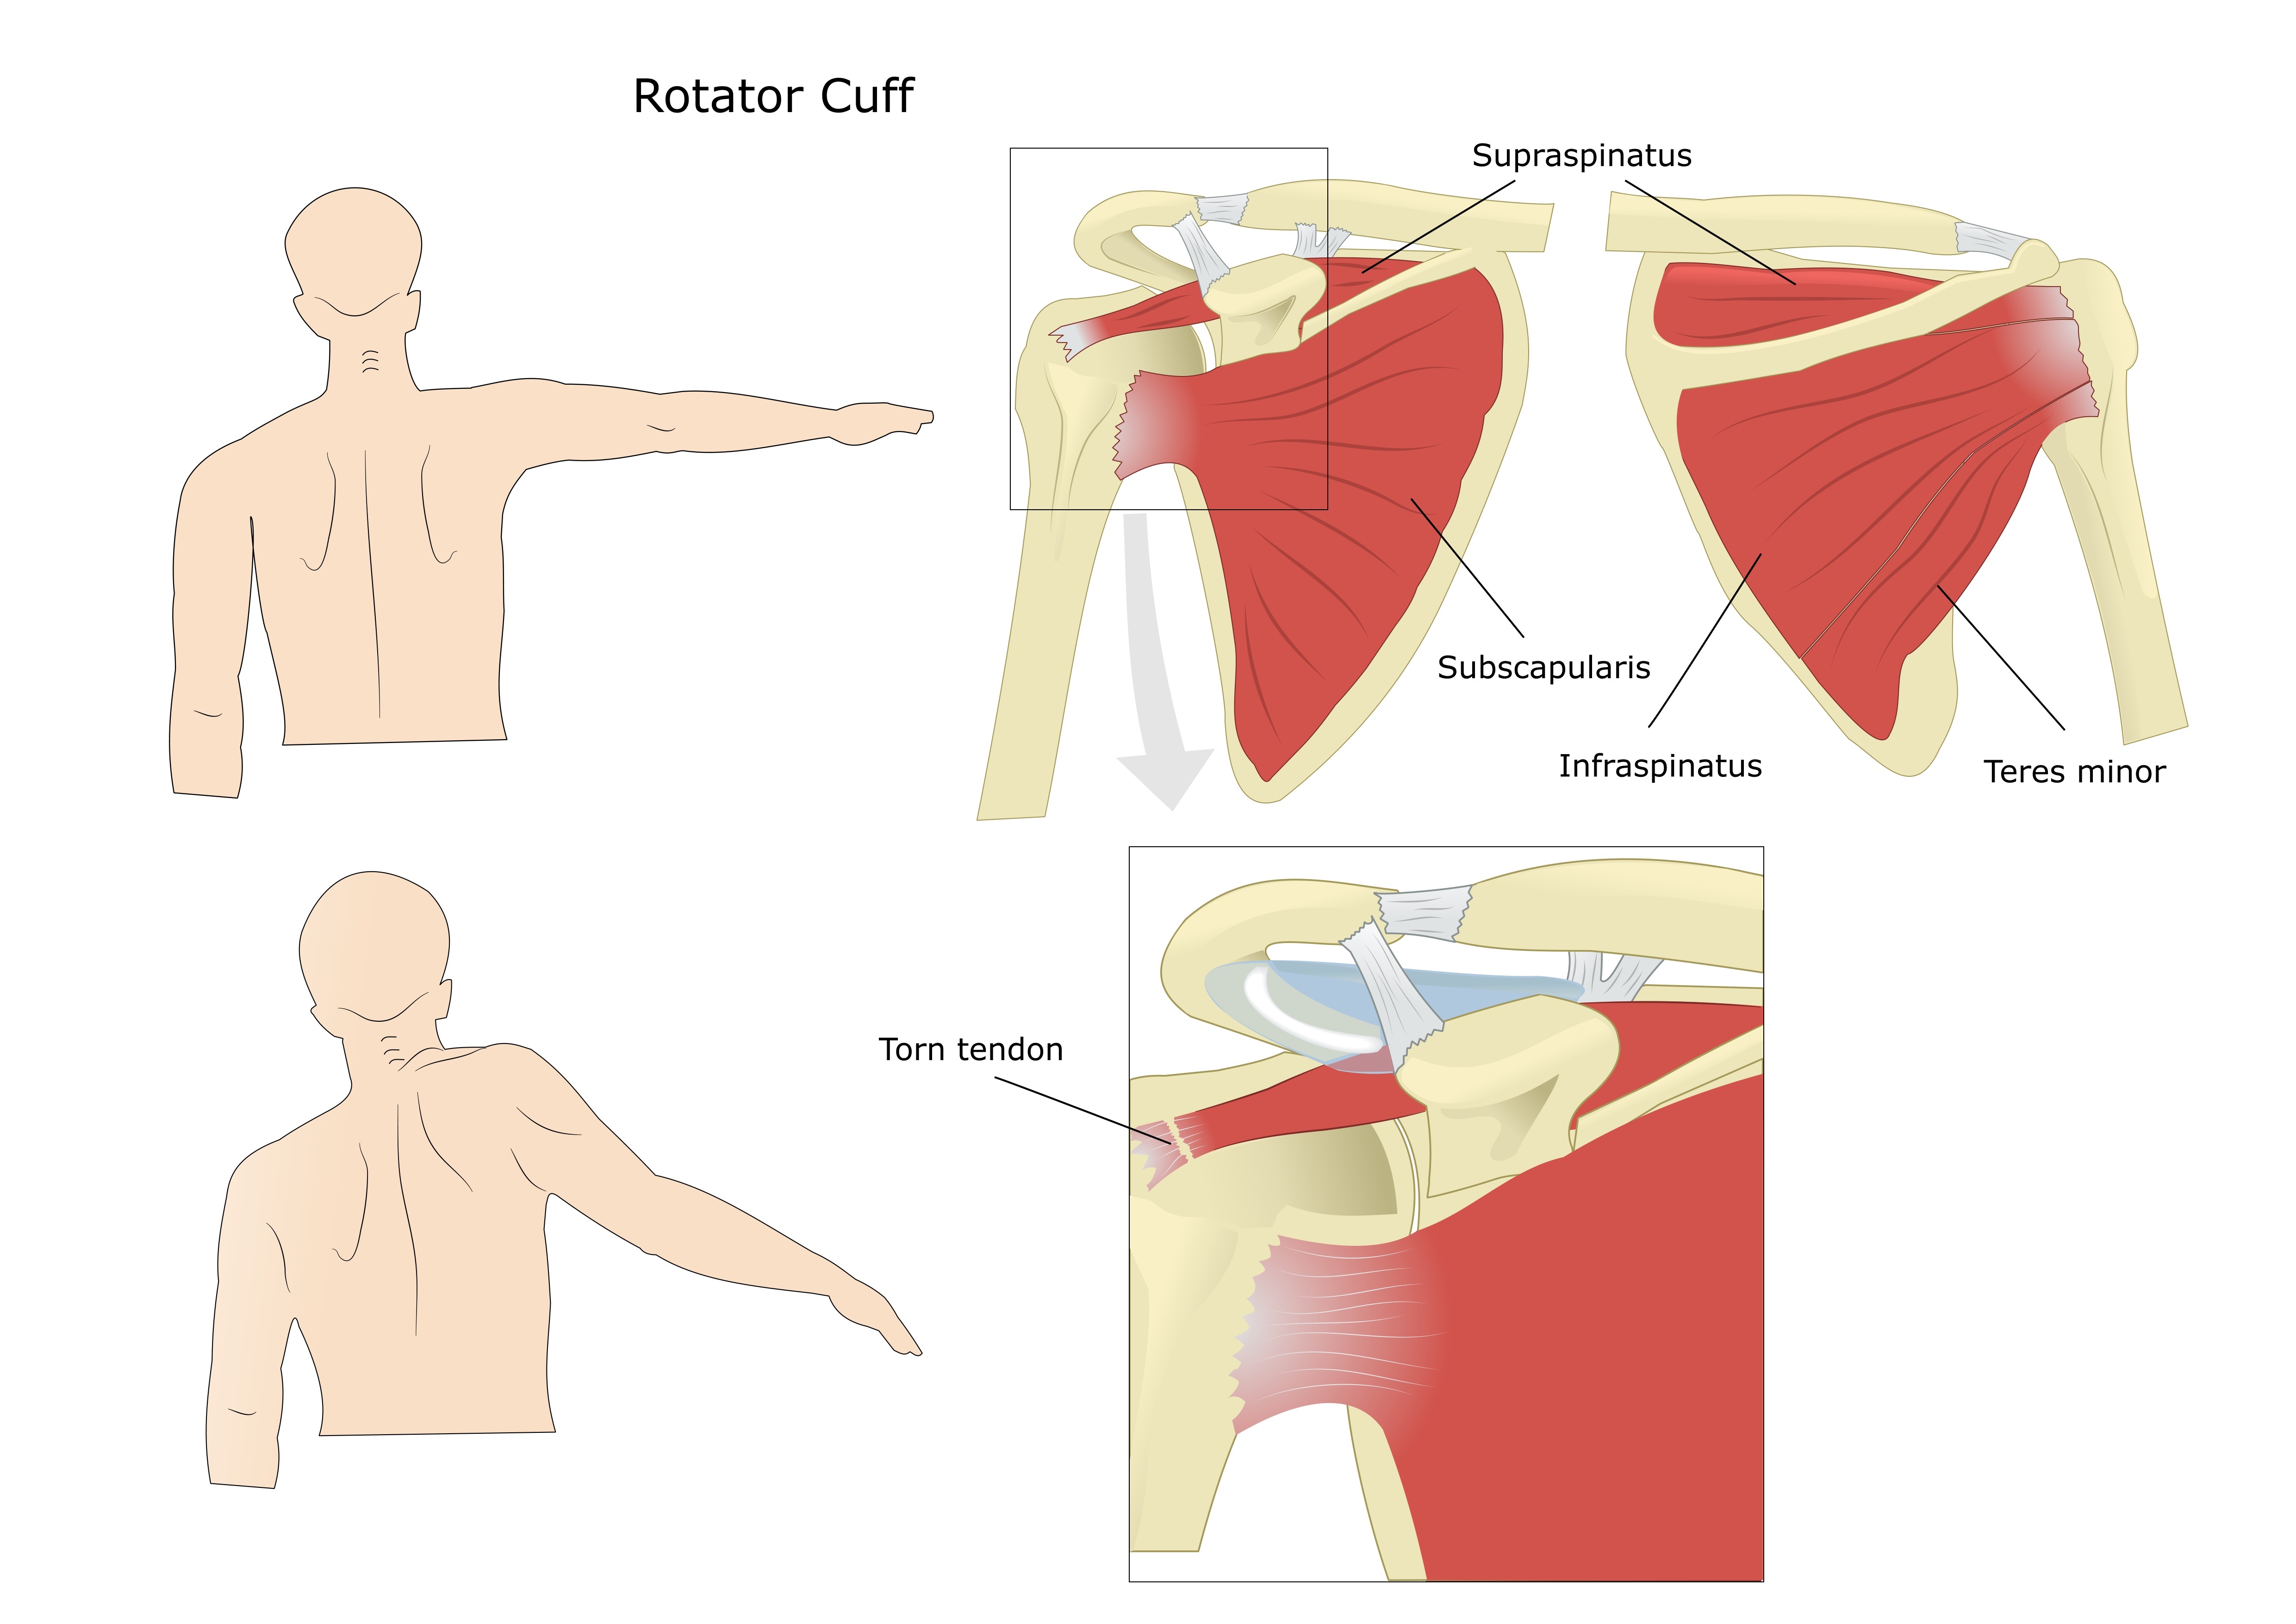 Common symptoms of a rotator cuff tear are shoulder pain and weakness.